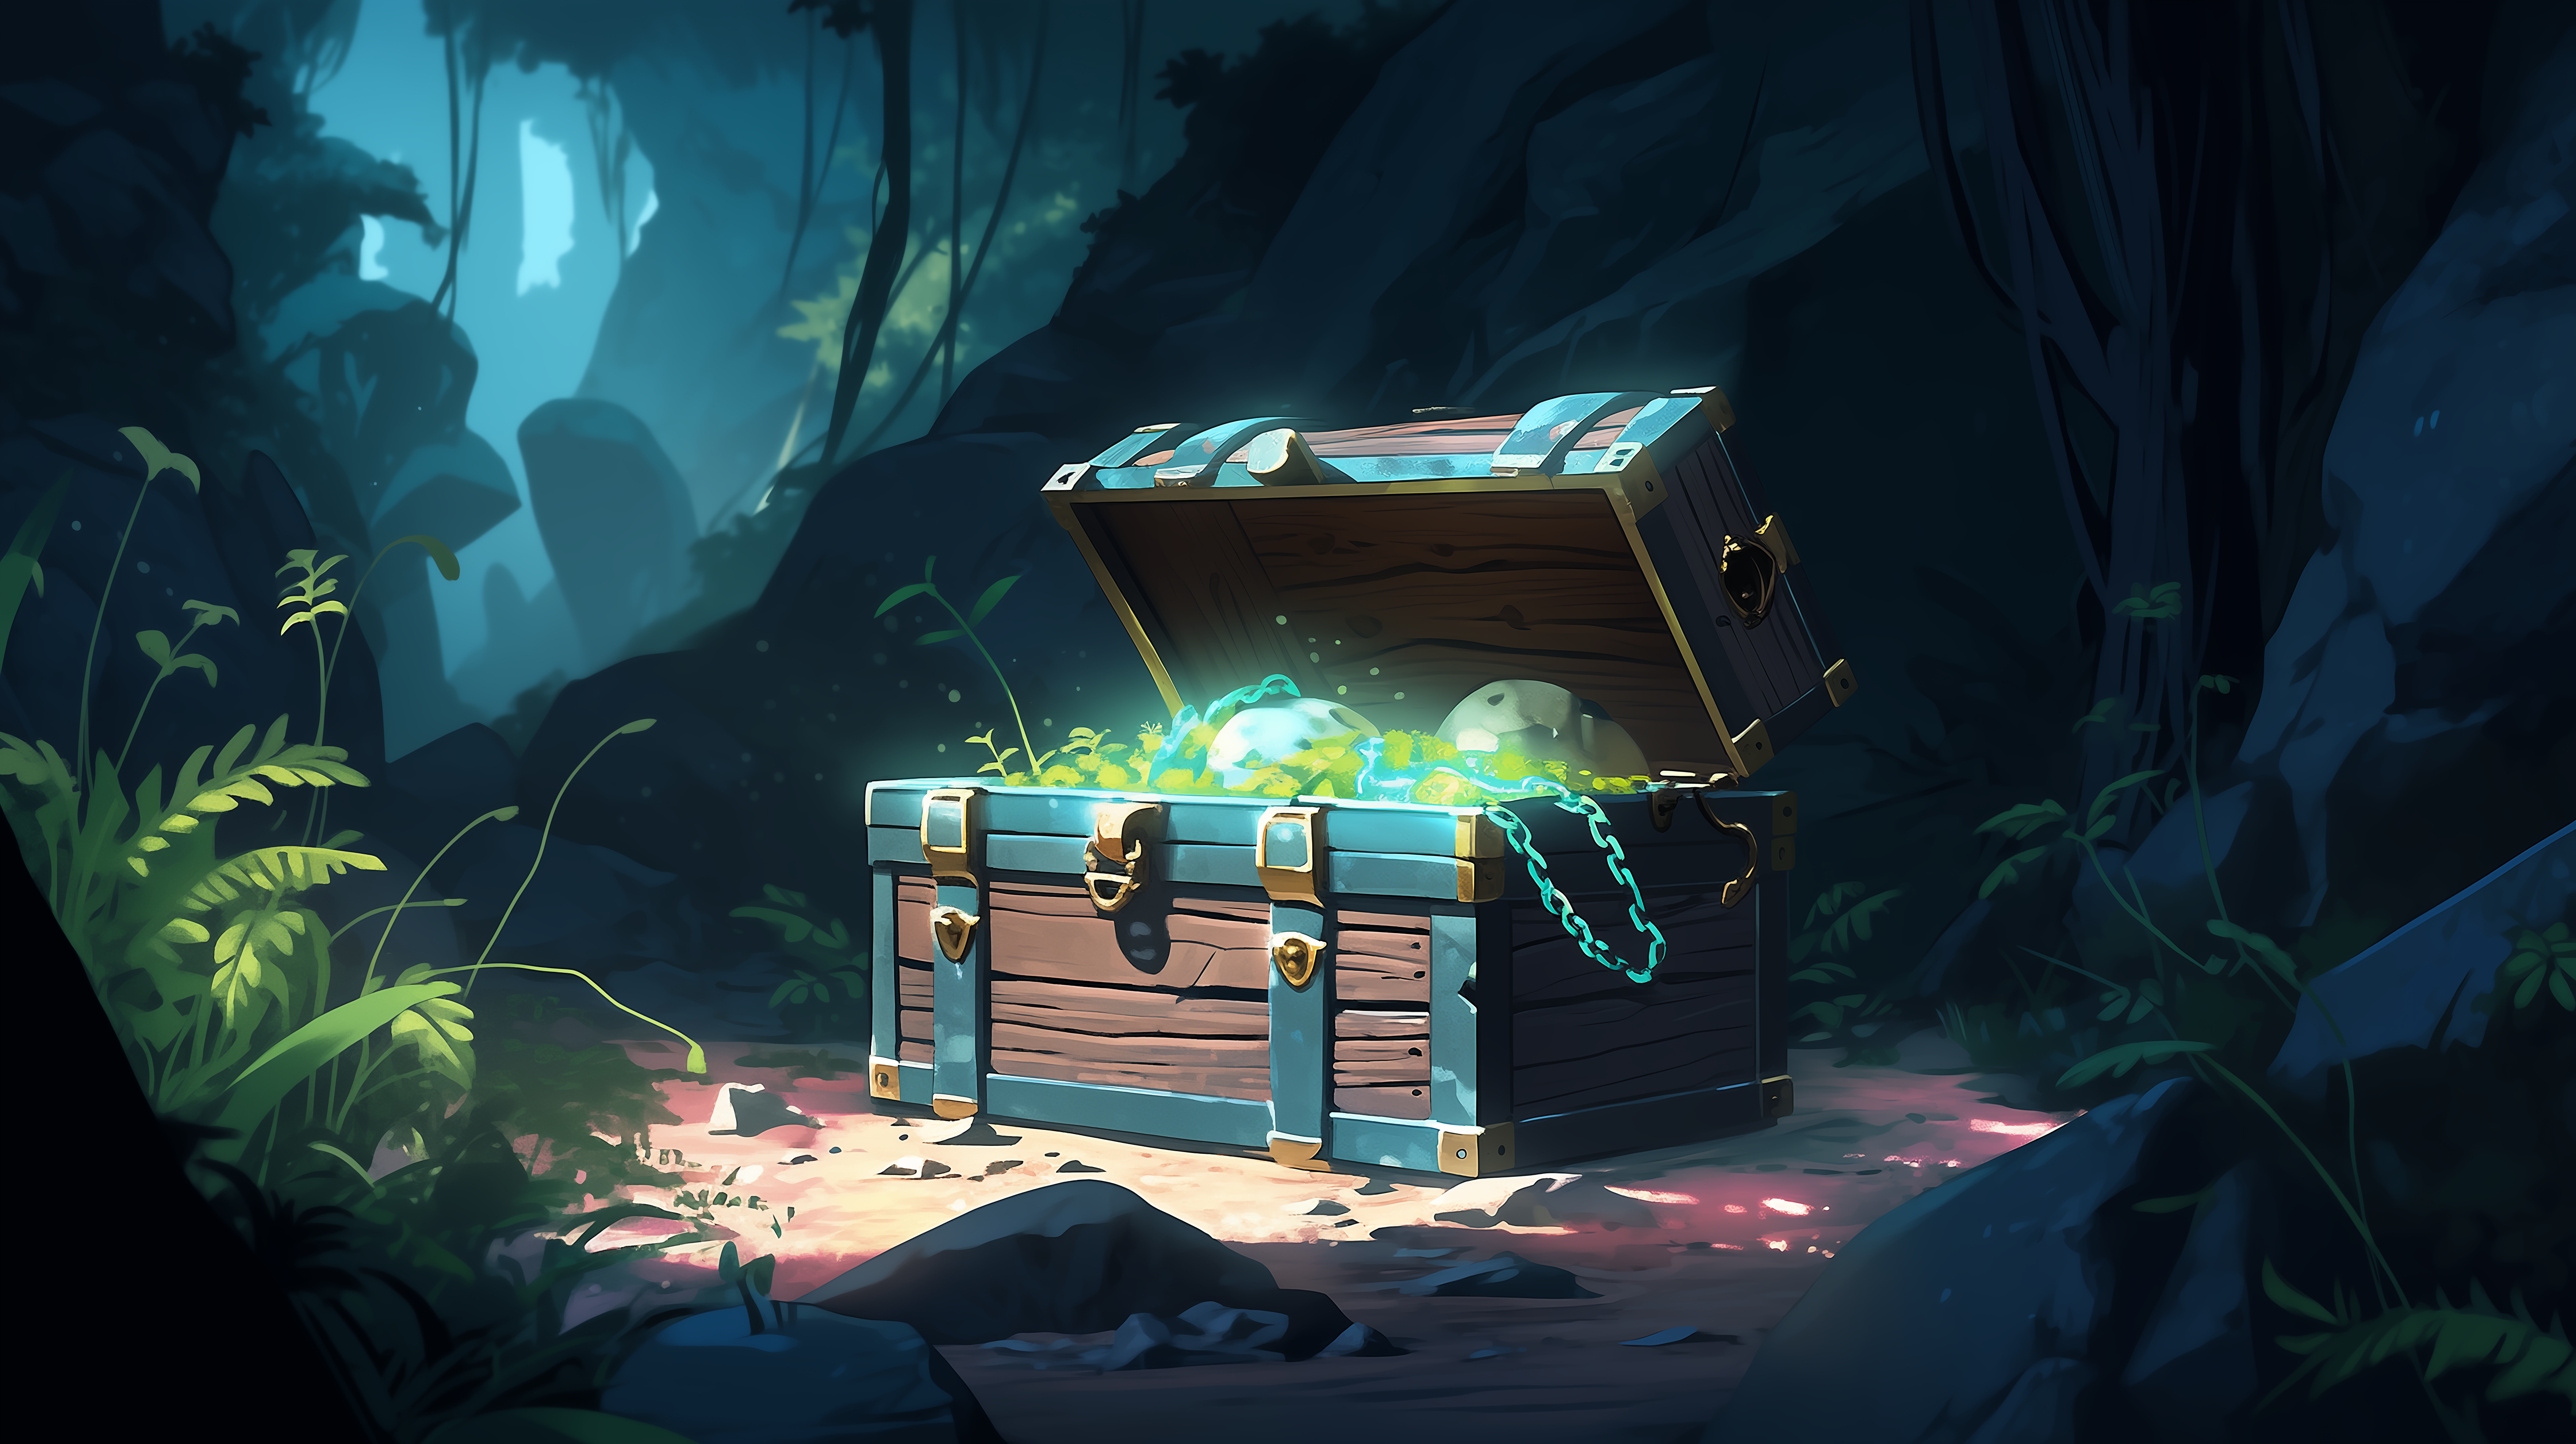 HD desktop wallpaper of an open treasure chest glowing with jewels in a mysterious cave setting.